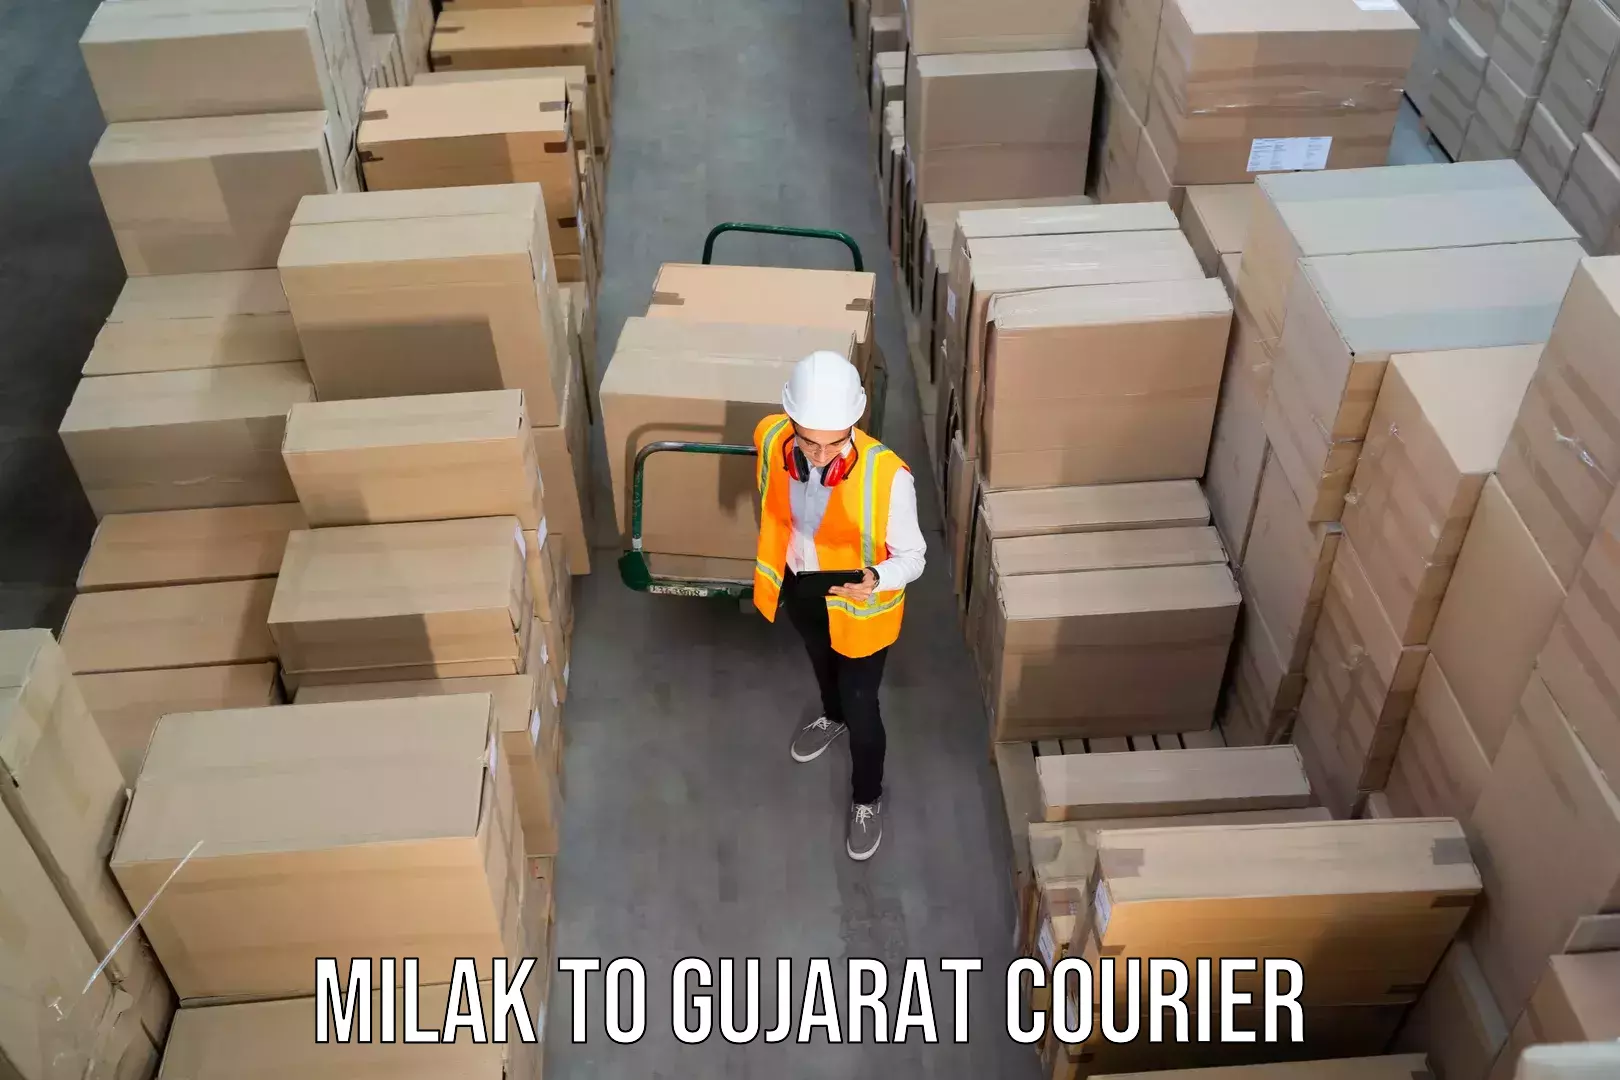 User-friendly delivery service Milak to Matar